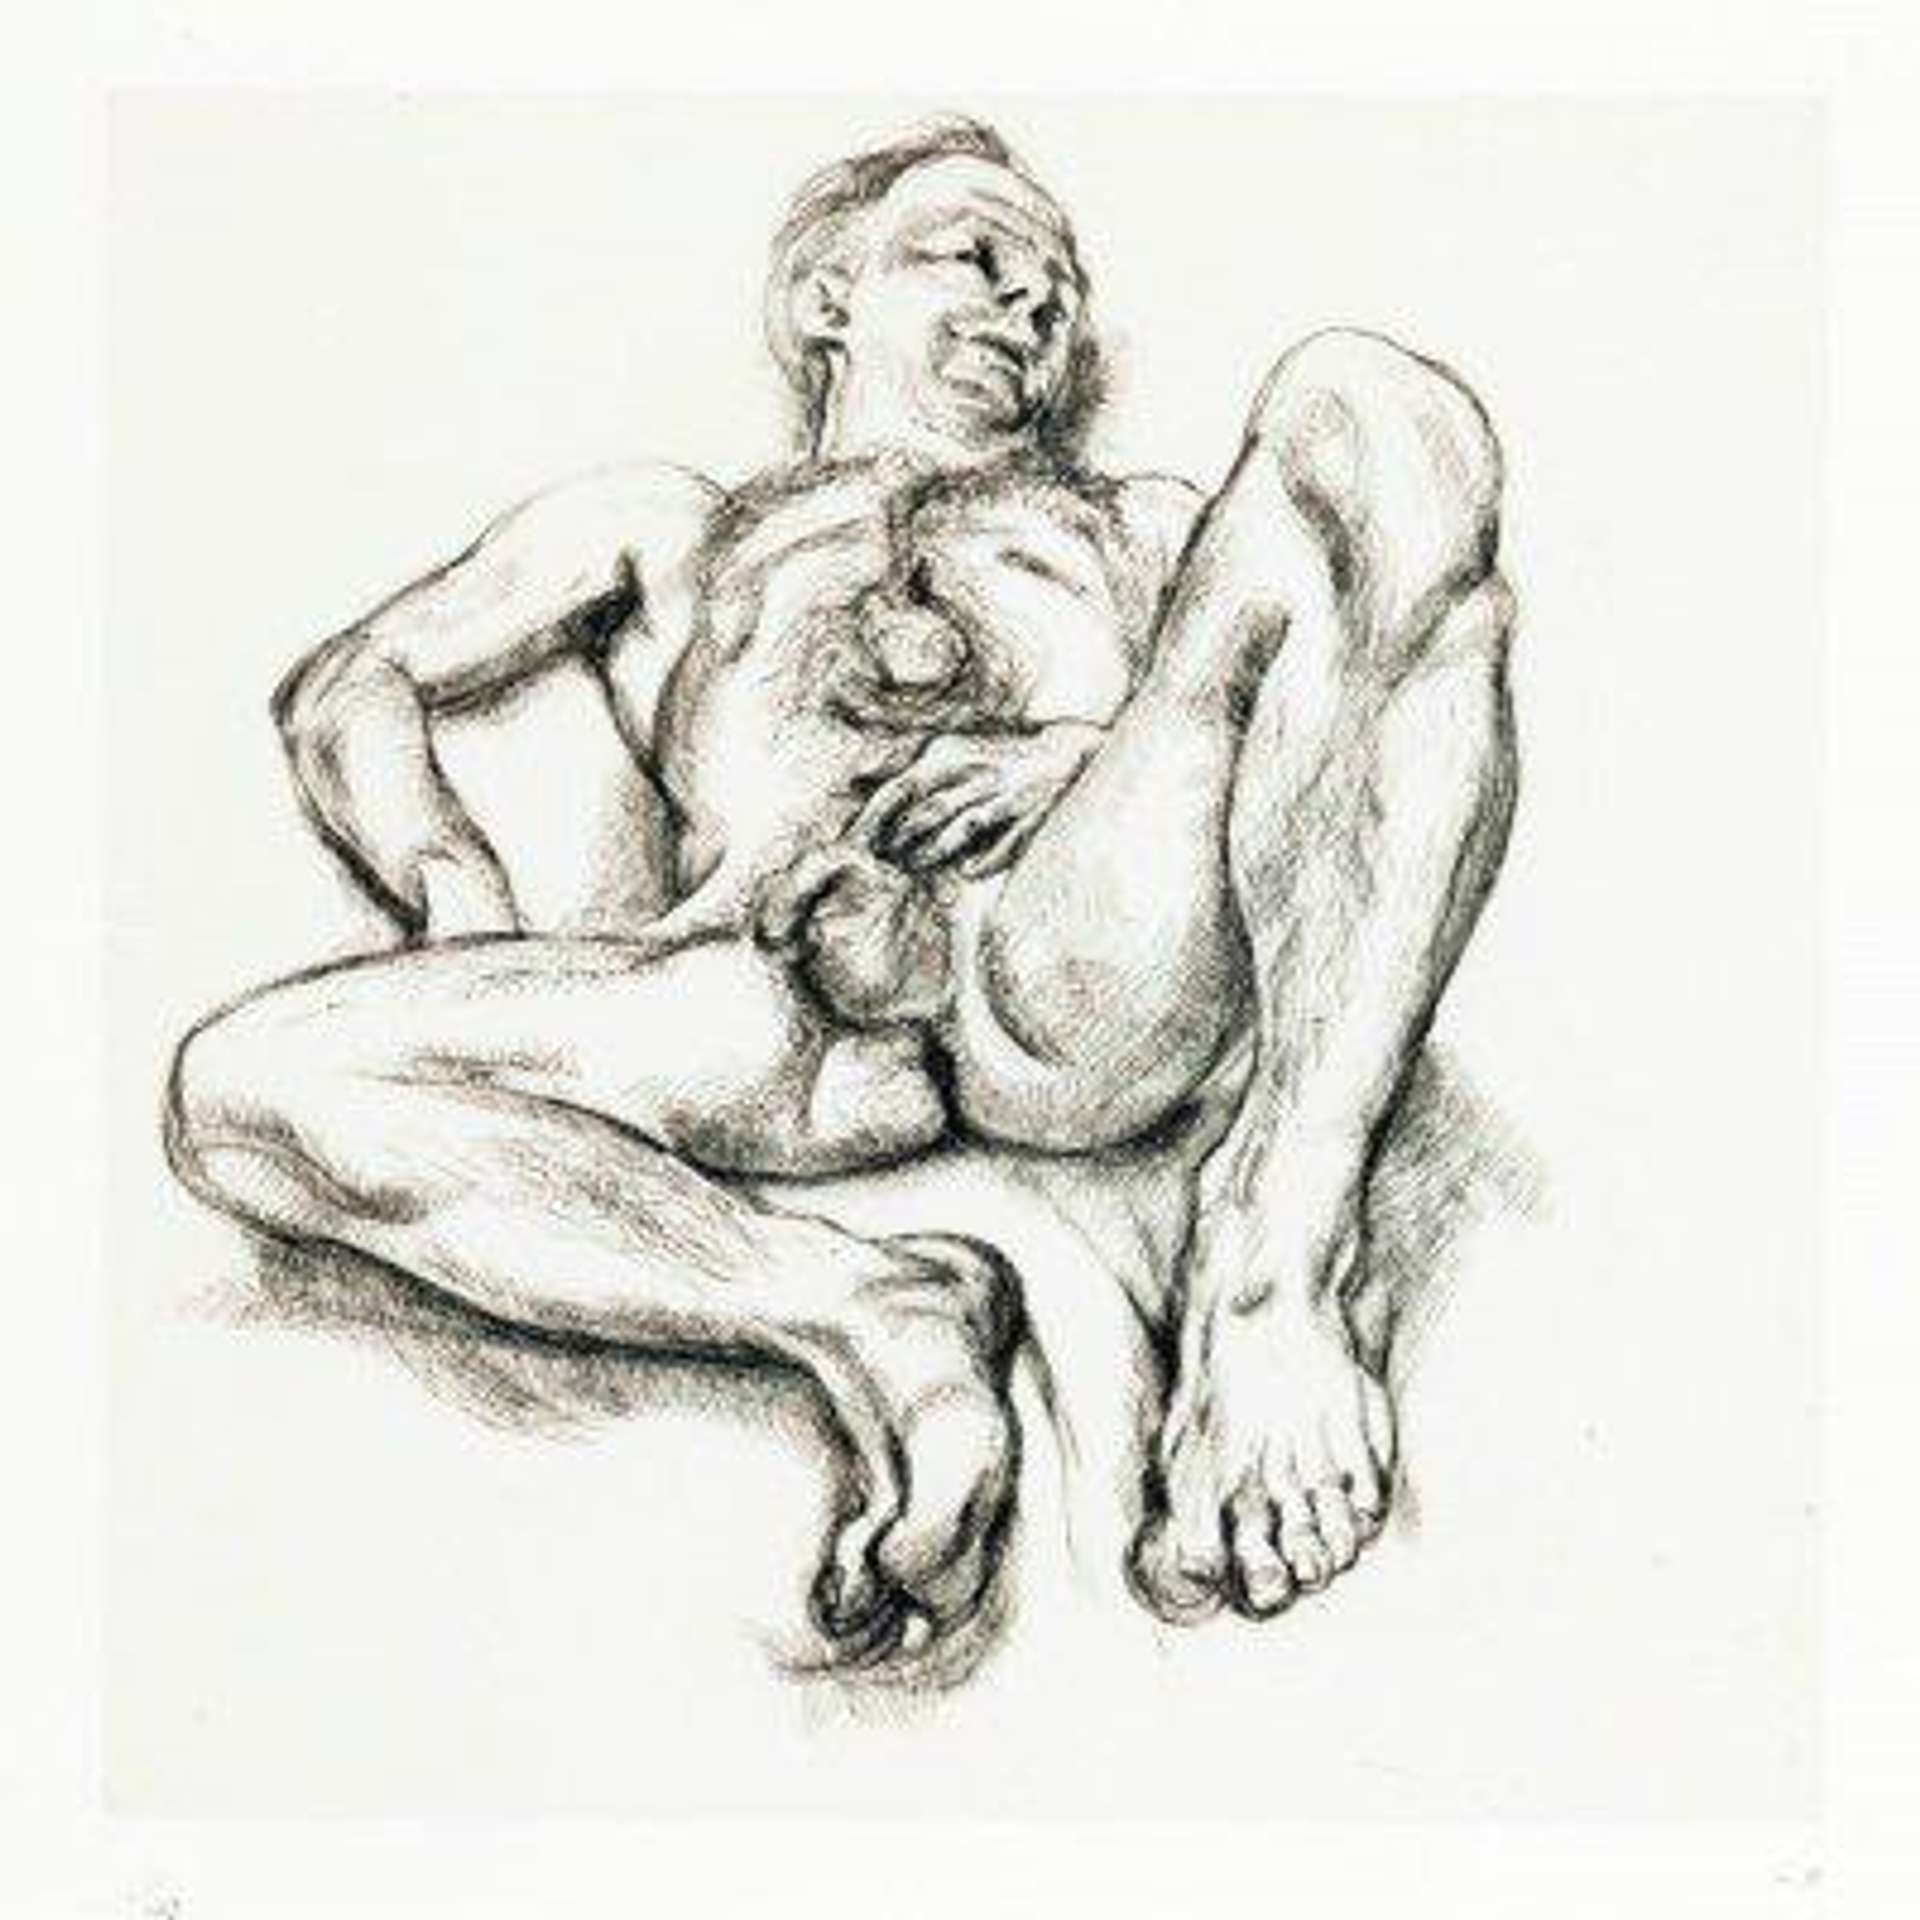 Naked Man On Bed - Signed Print by Lucian Freud 1990 - MyArtBroker